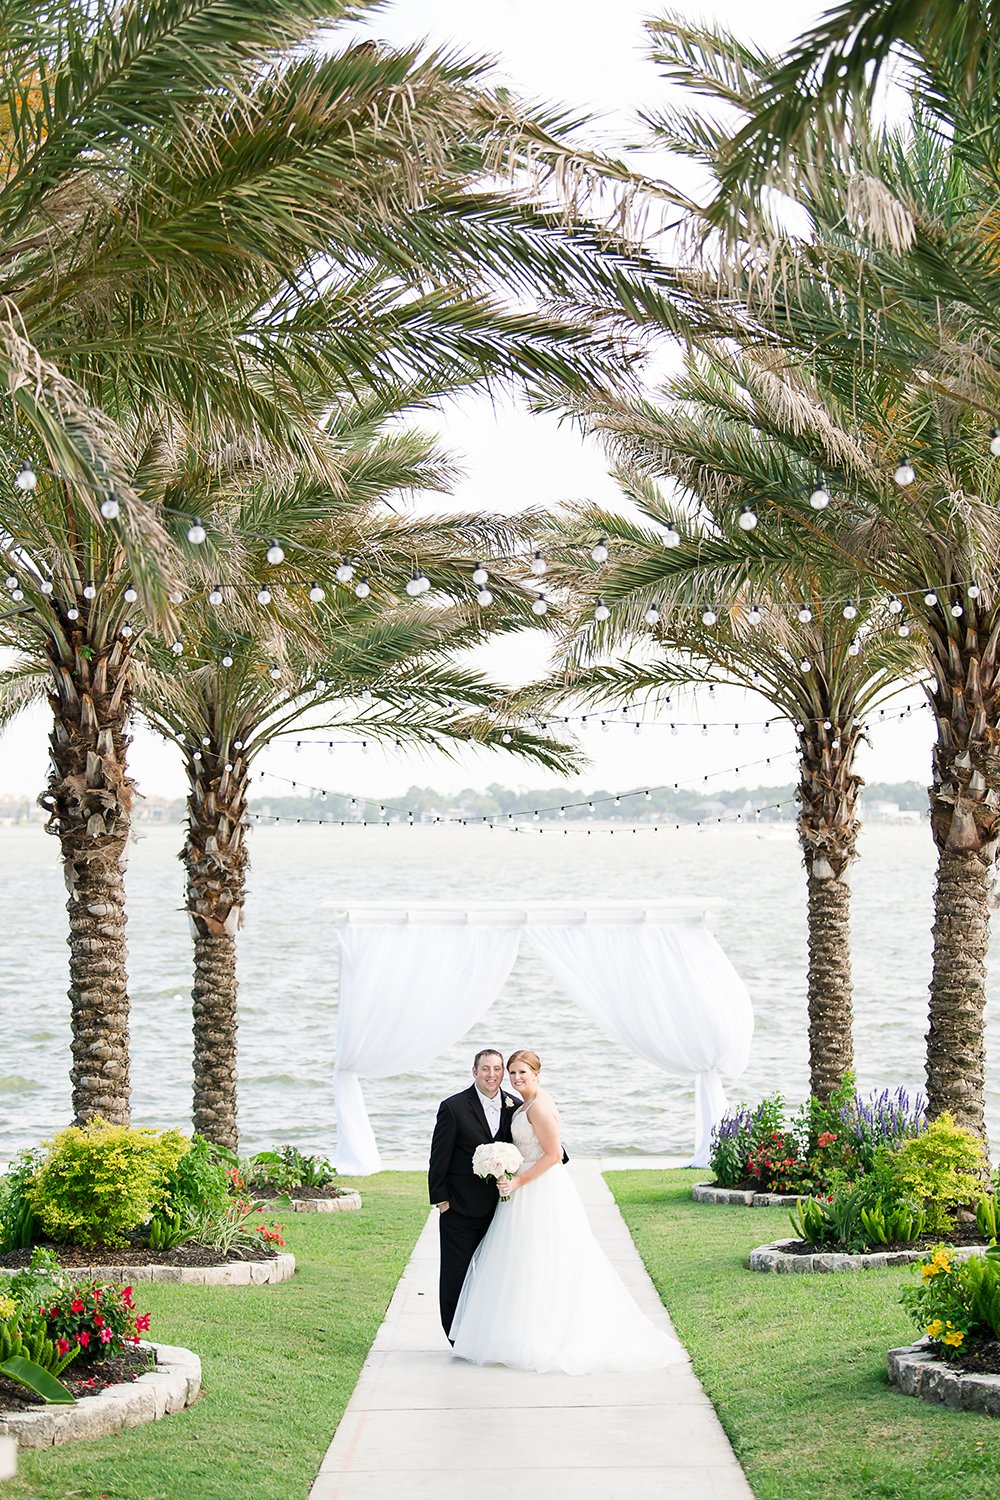 lakeside wedding ceremony with beautiful string lights